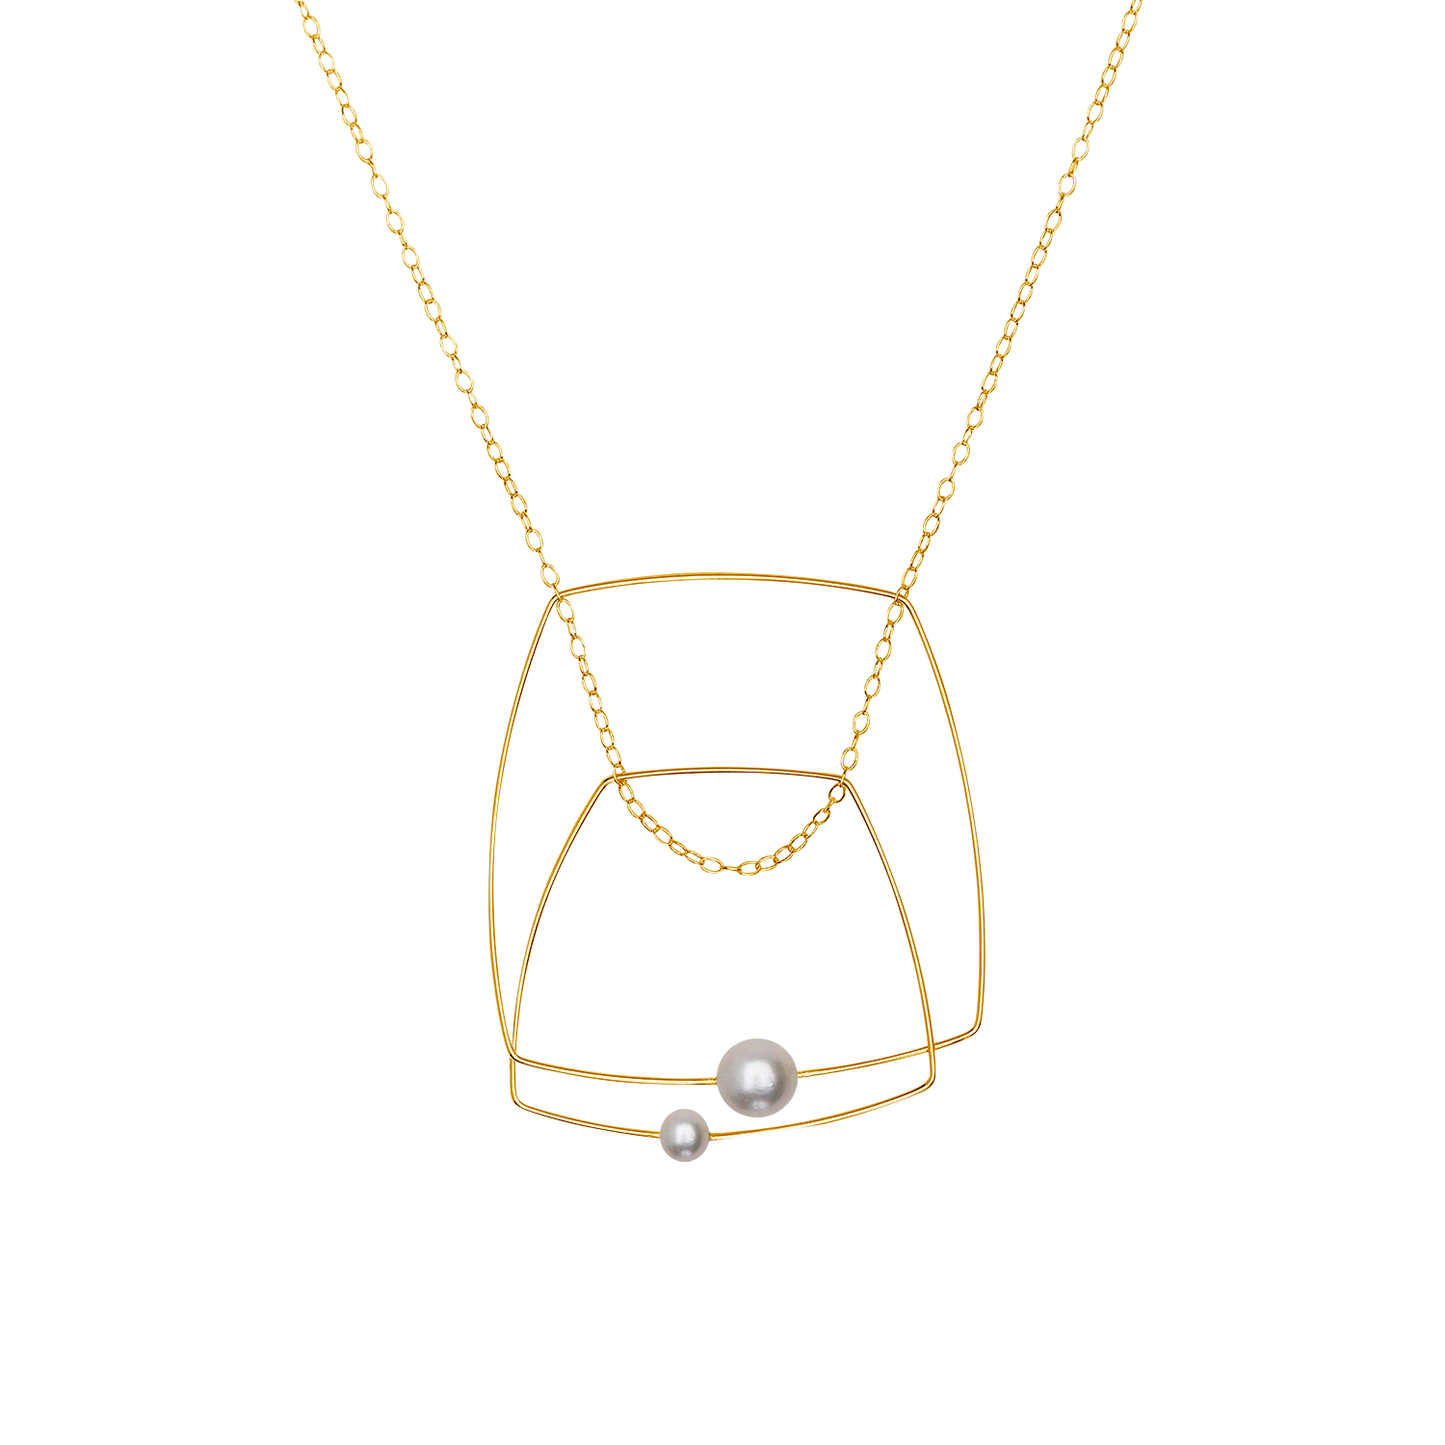 Double Square Pendant Necklace with Round Freshwater Pearls